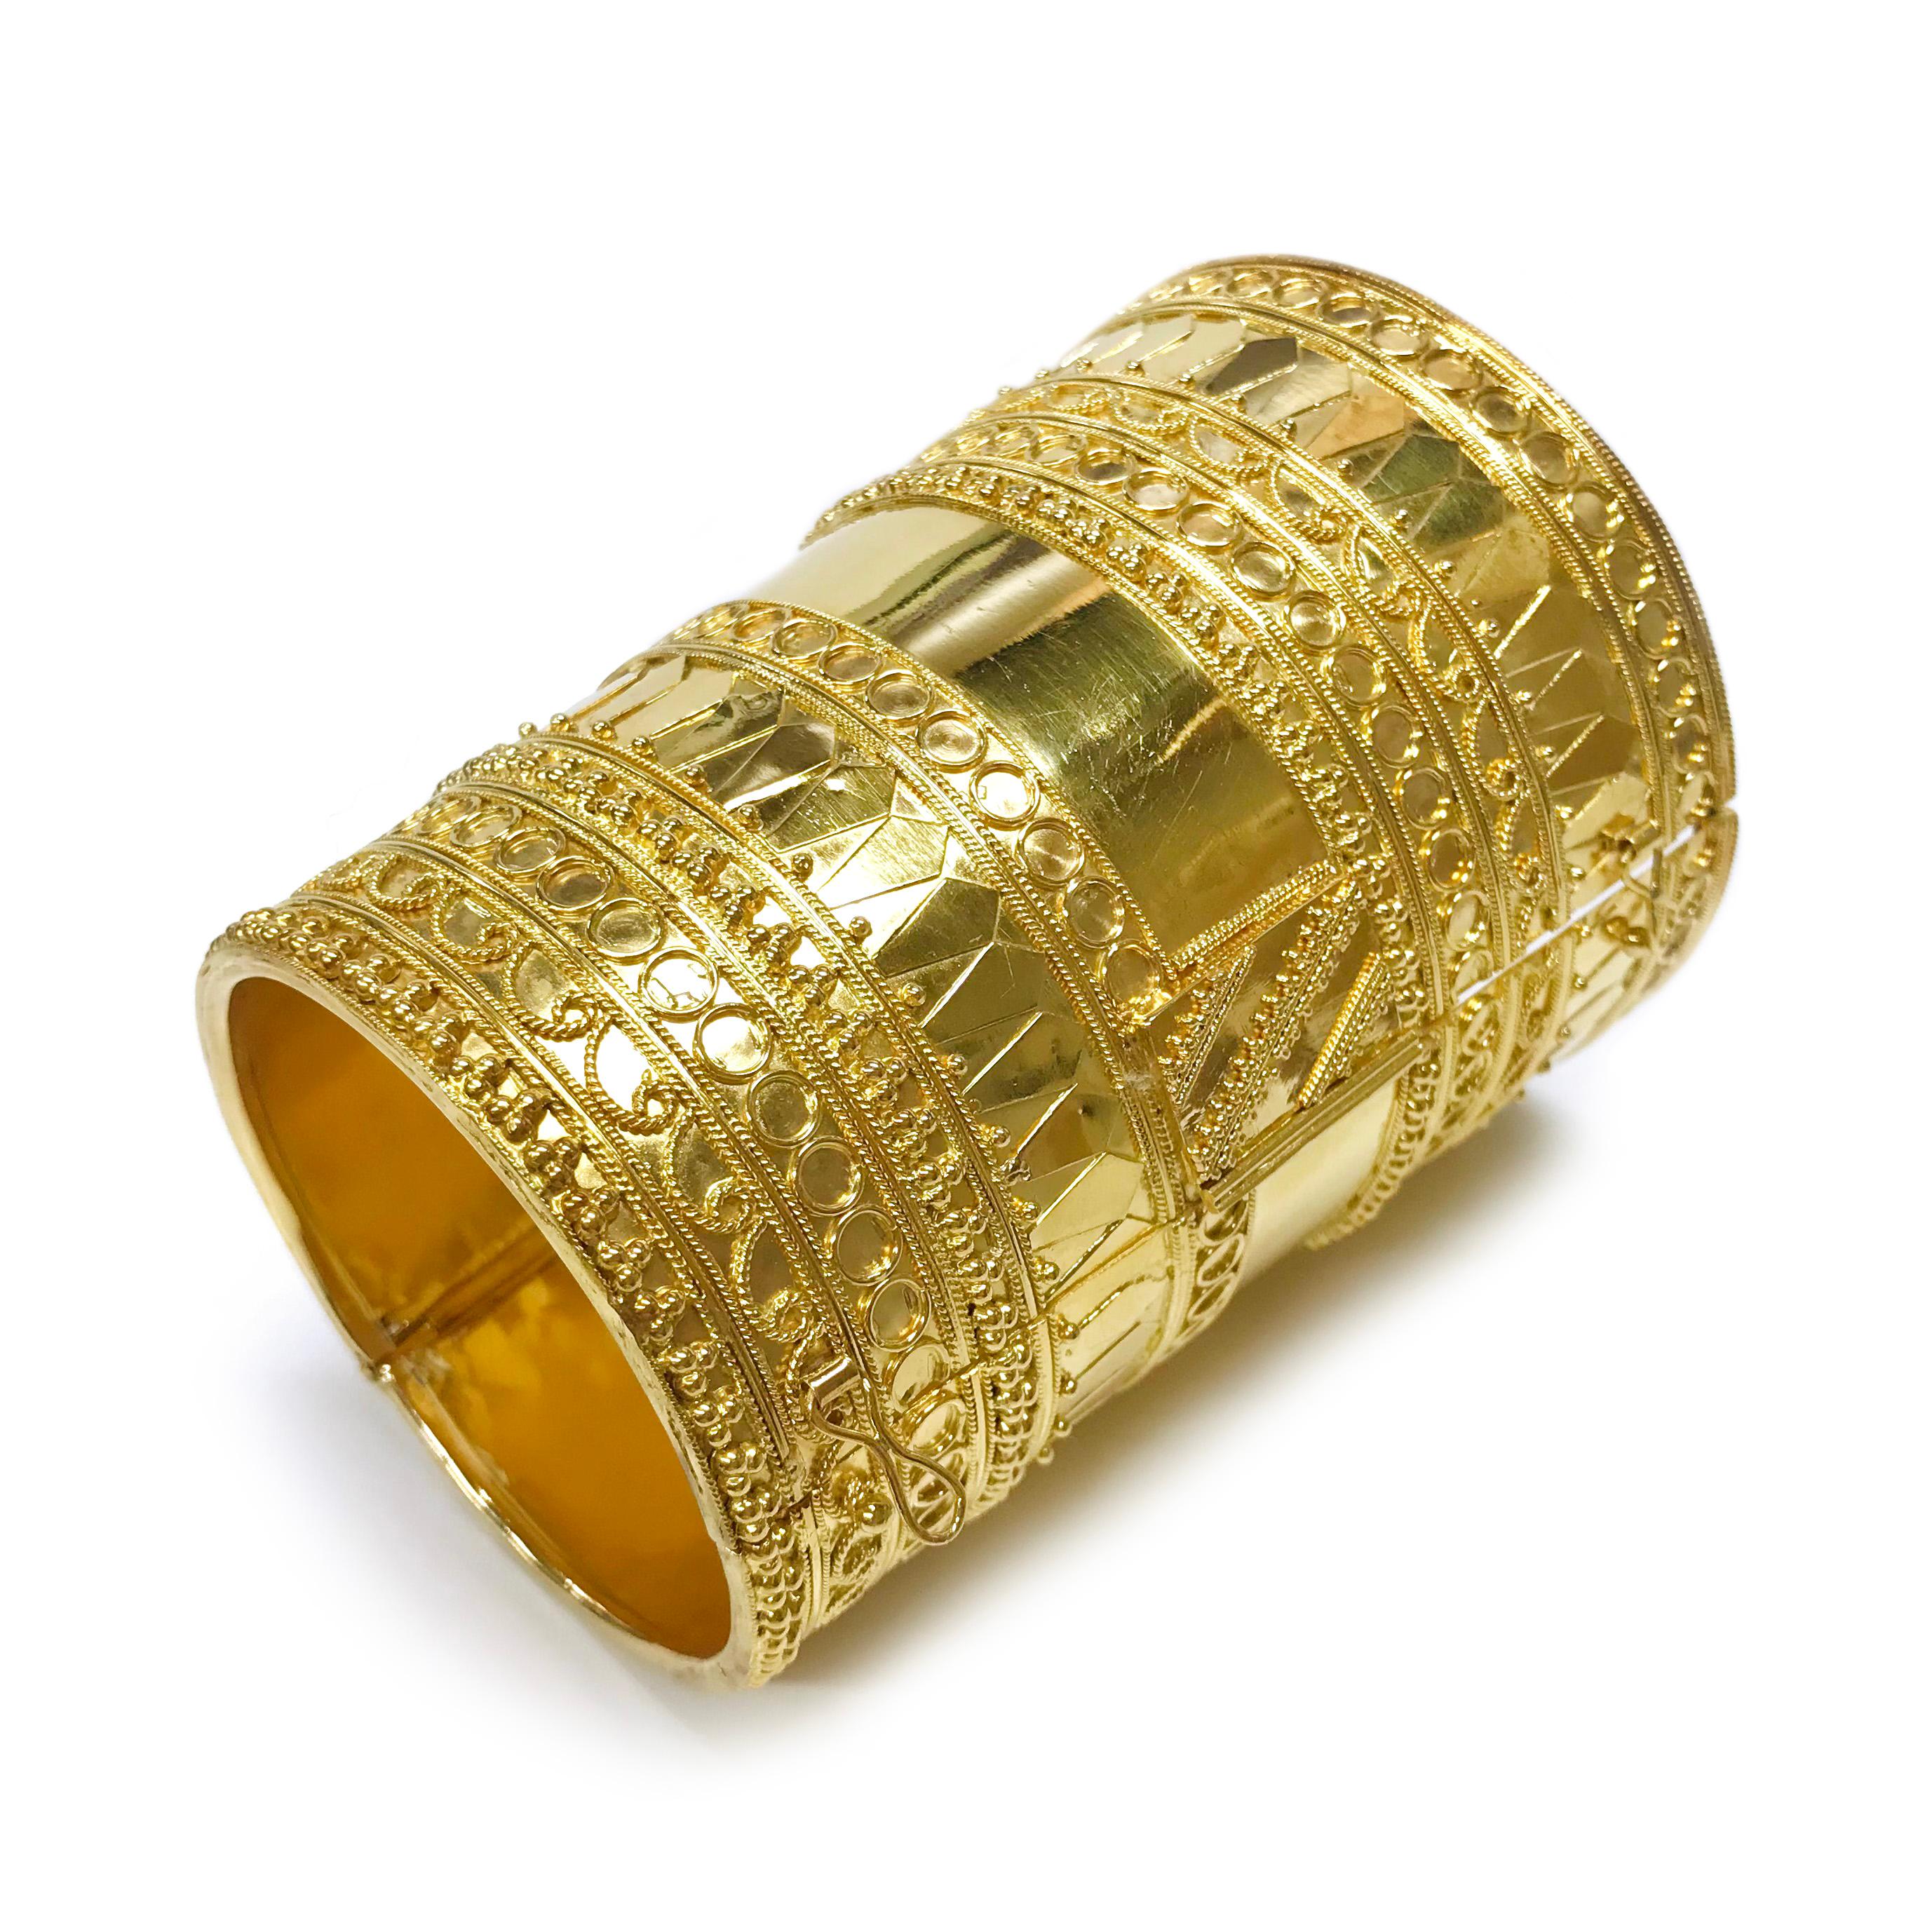 22 Karat Wide Indian hinged Bracelet. This beautiful traditional Indian hinged bracelet features meticulous milgrain detail, multiple shape designs, and gold beads. The handmade quality of this piece is exceptional. The bracelet tapers starting at